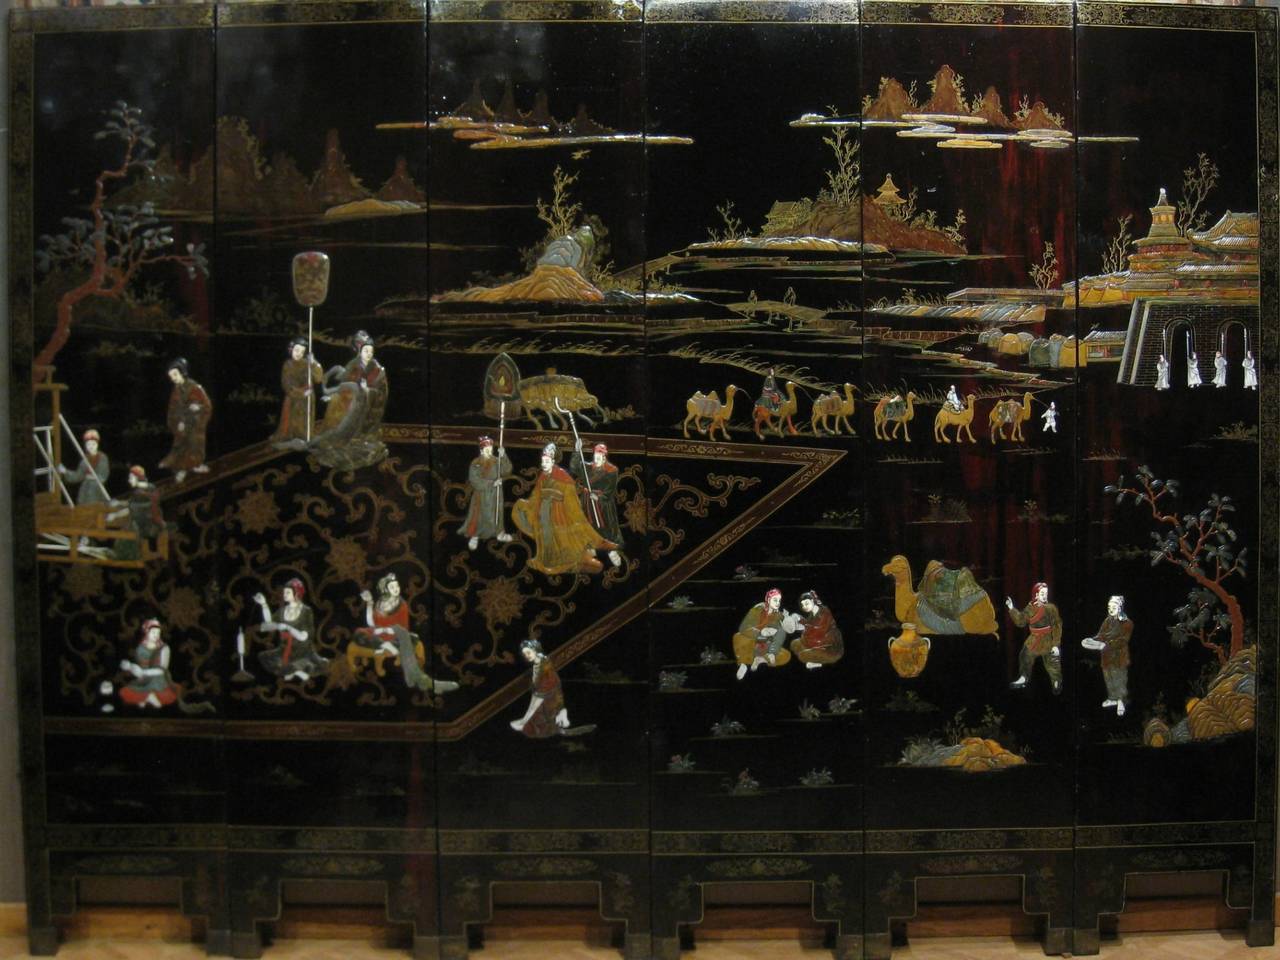 Screen Chinese lacquer 19th century, character sets in a castle landscape, ivory, mother-of-pearl, hard stones and soap stones. The black lacquered back and gold decorations of fantastic birds.